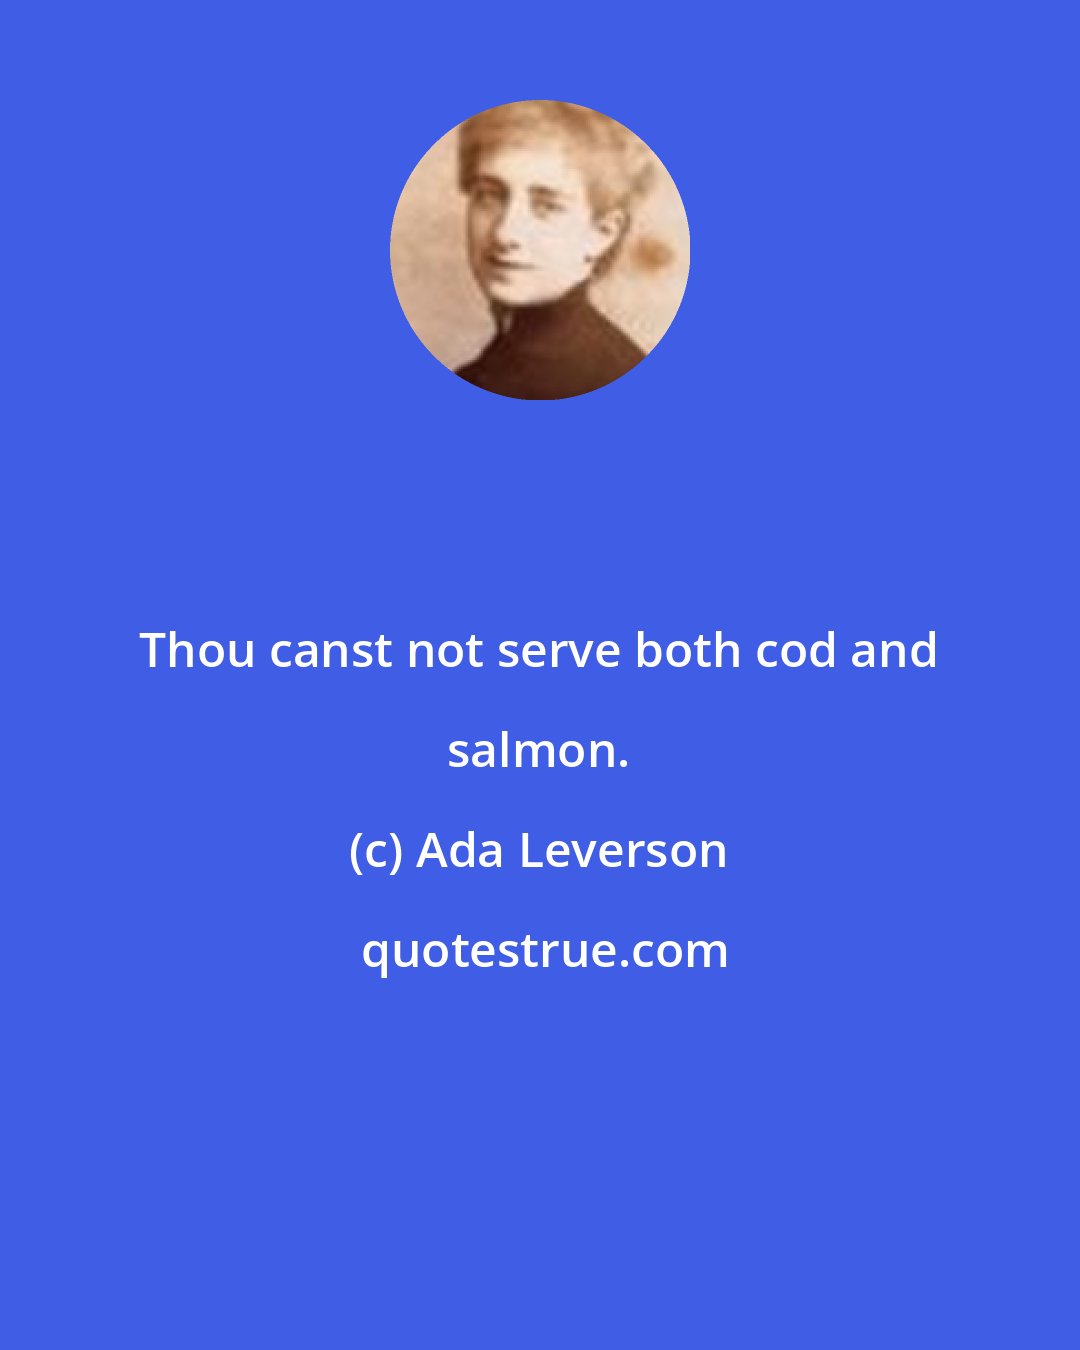 Ada Leverson: Thou canst not serve both cod and salmon.